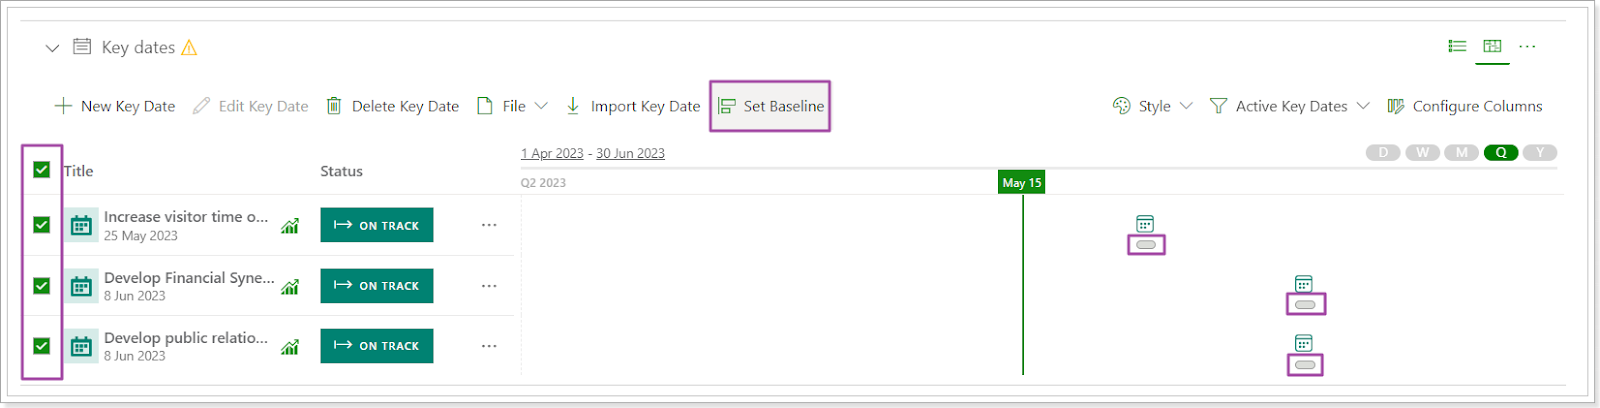 Setting baseline in PPM Express